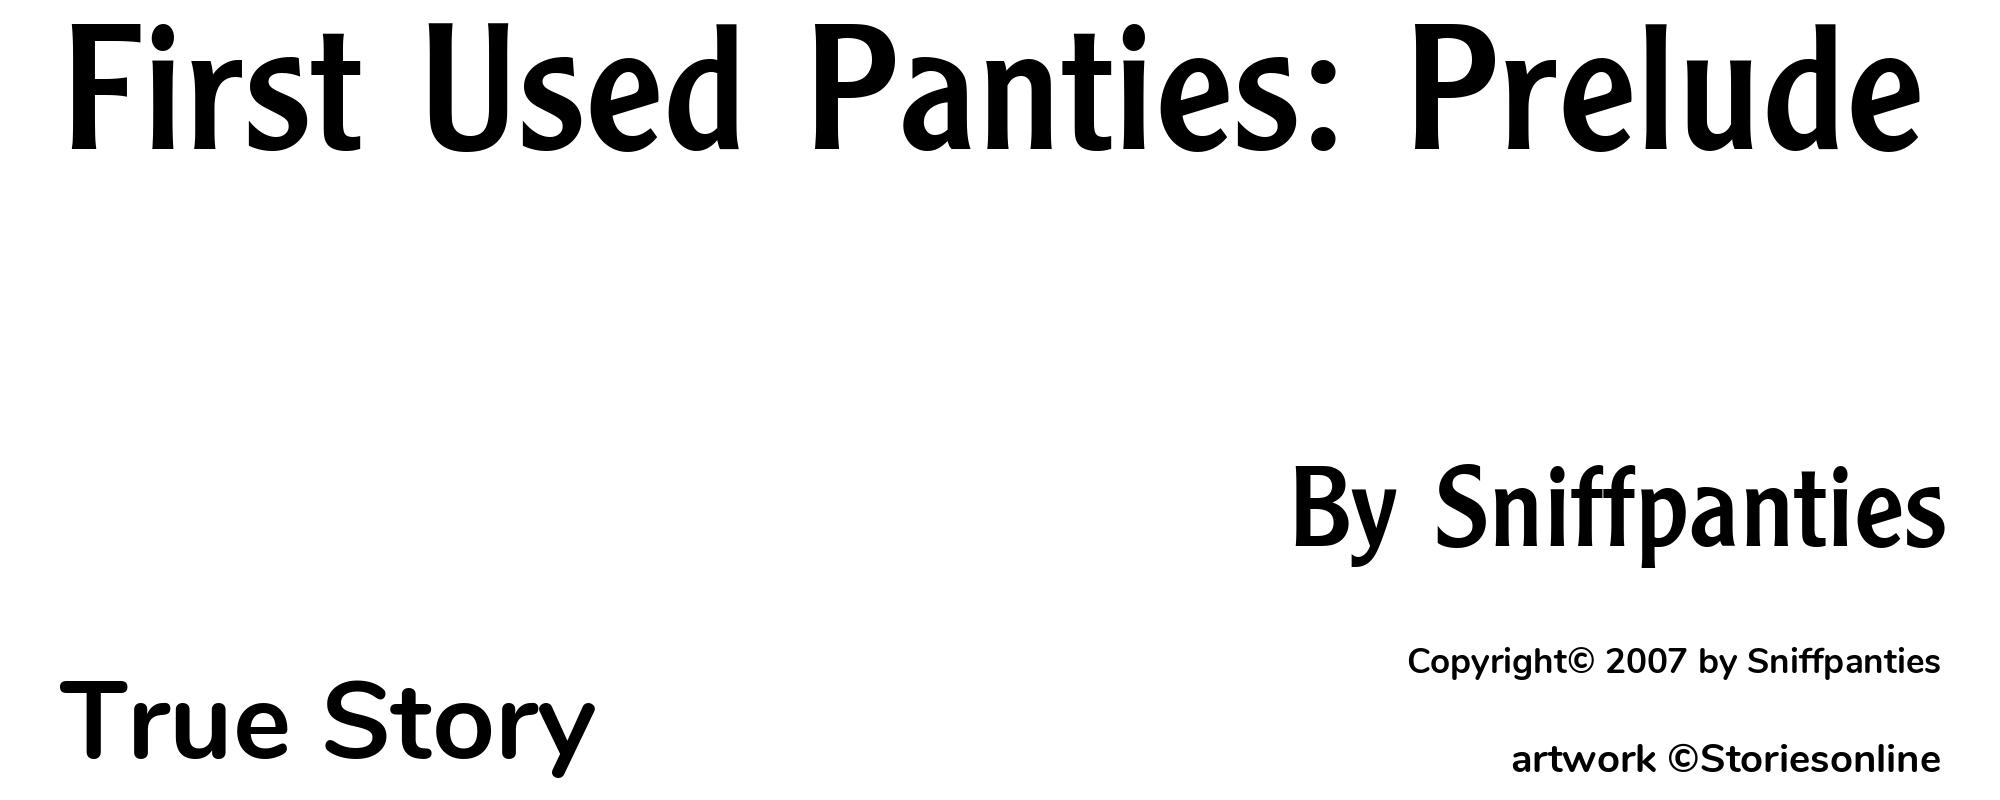 First Used Panties: Prelude - Cover